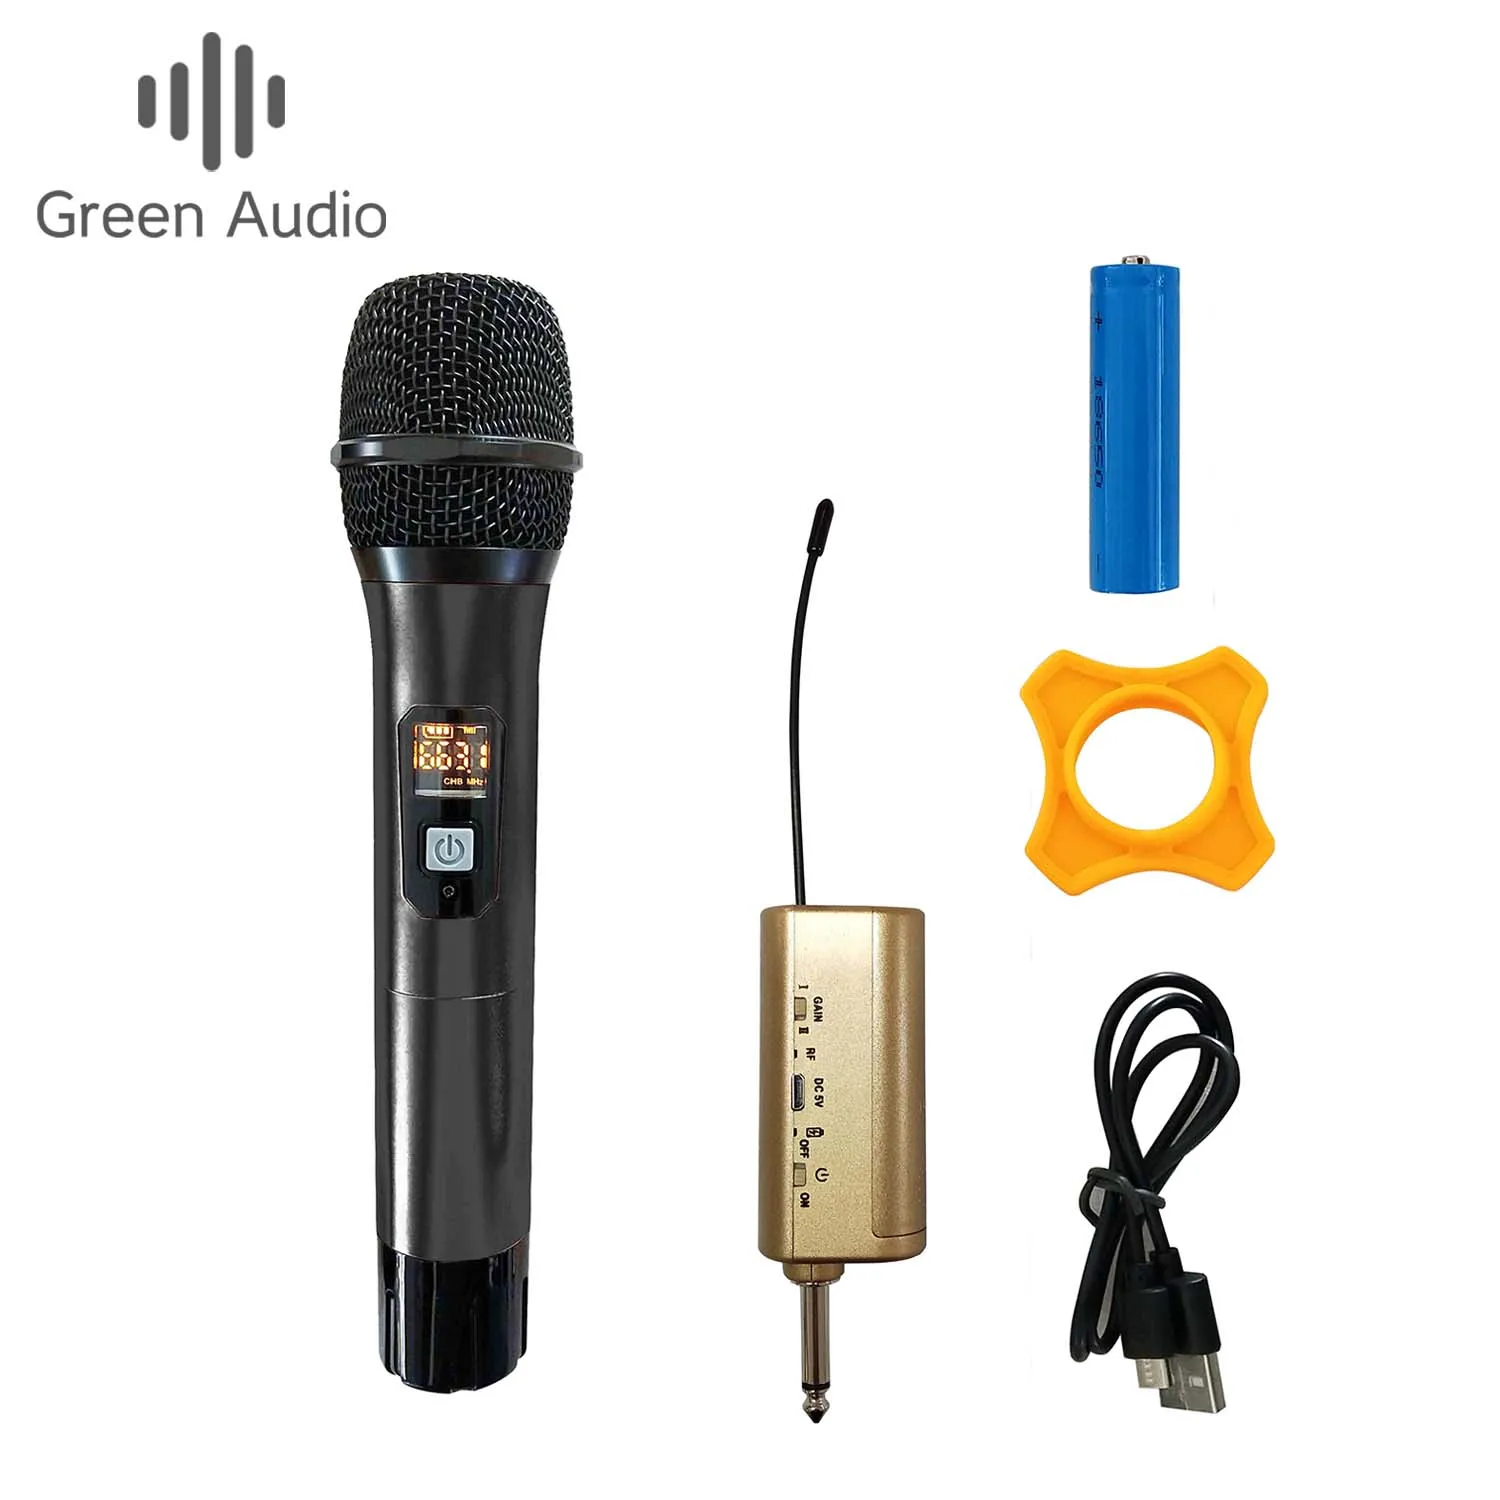 

GAW-009A Professional UHF Wireless Microphone Handheld Metal Mic FM Stage Performance Microphone With Rechargeable Receiver